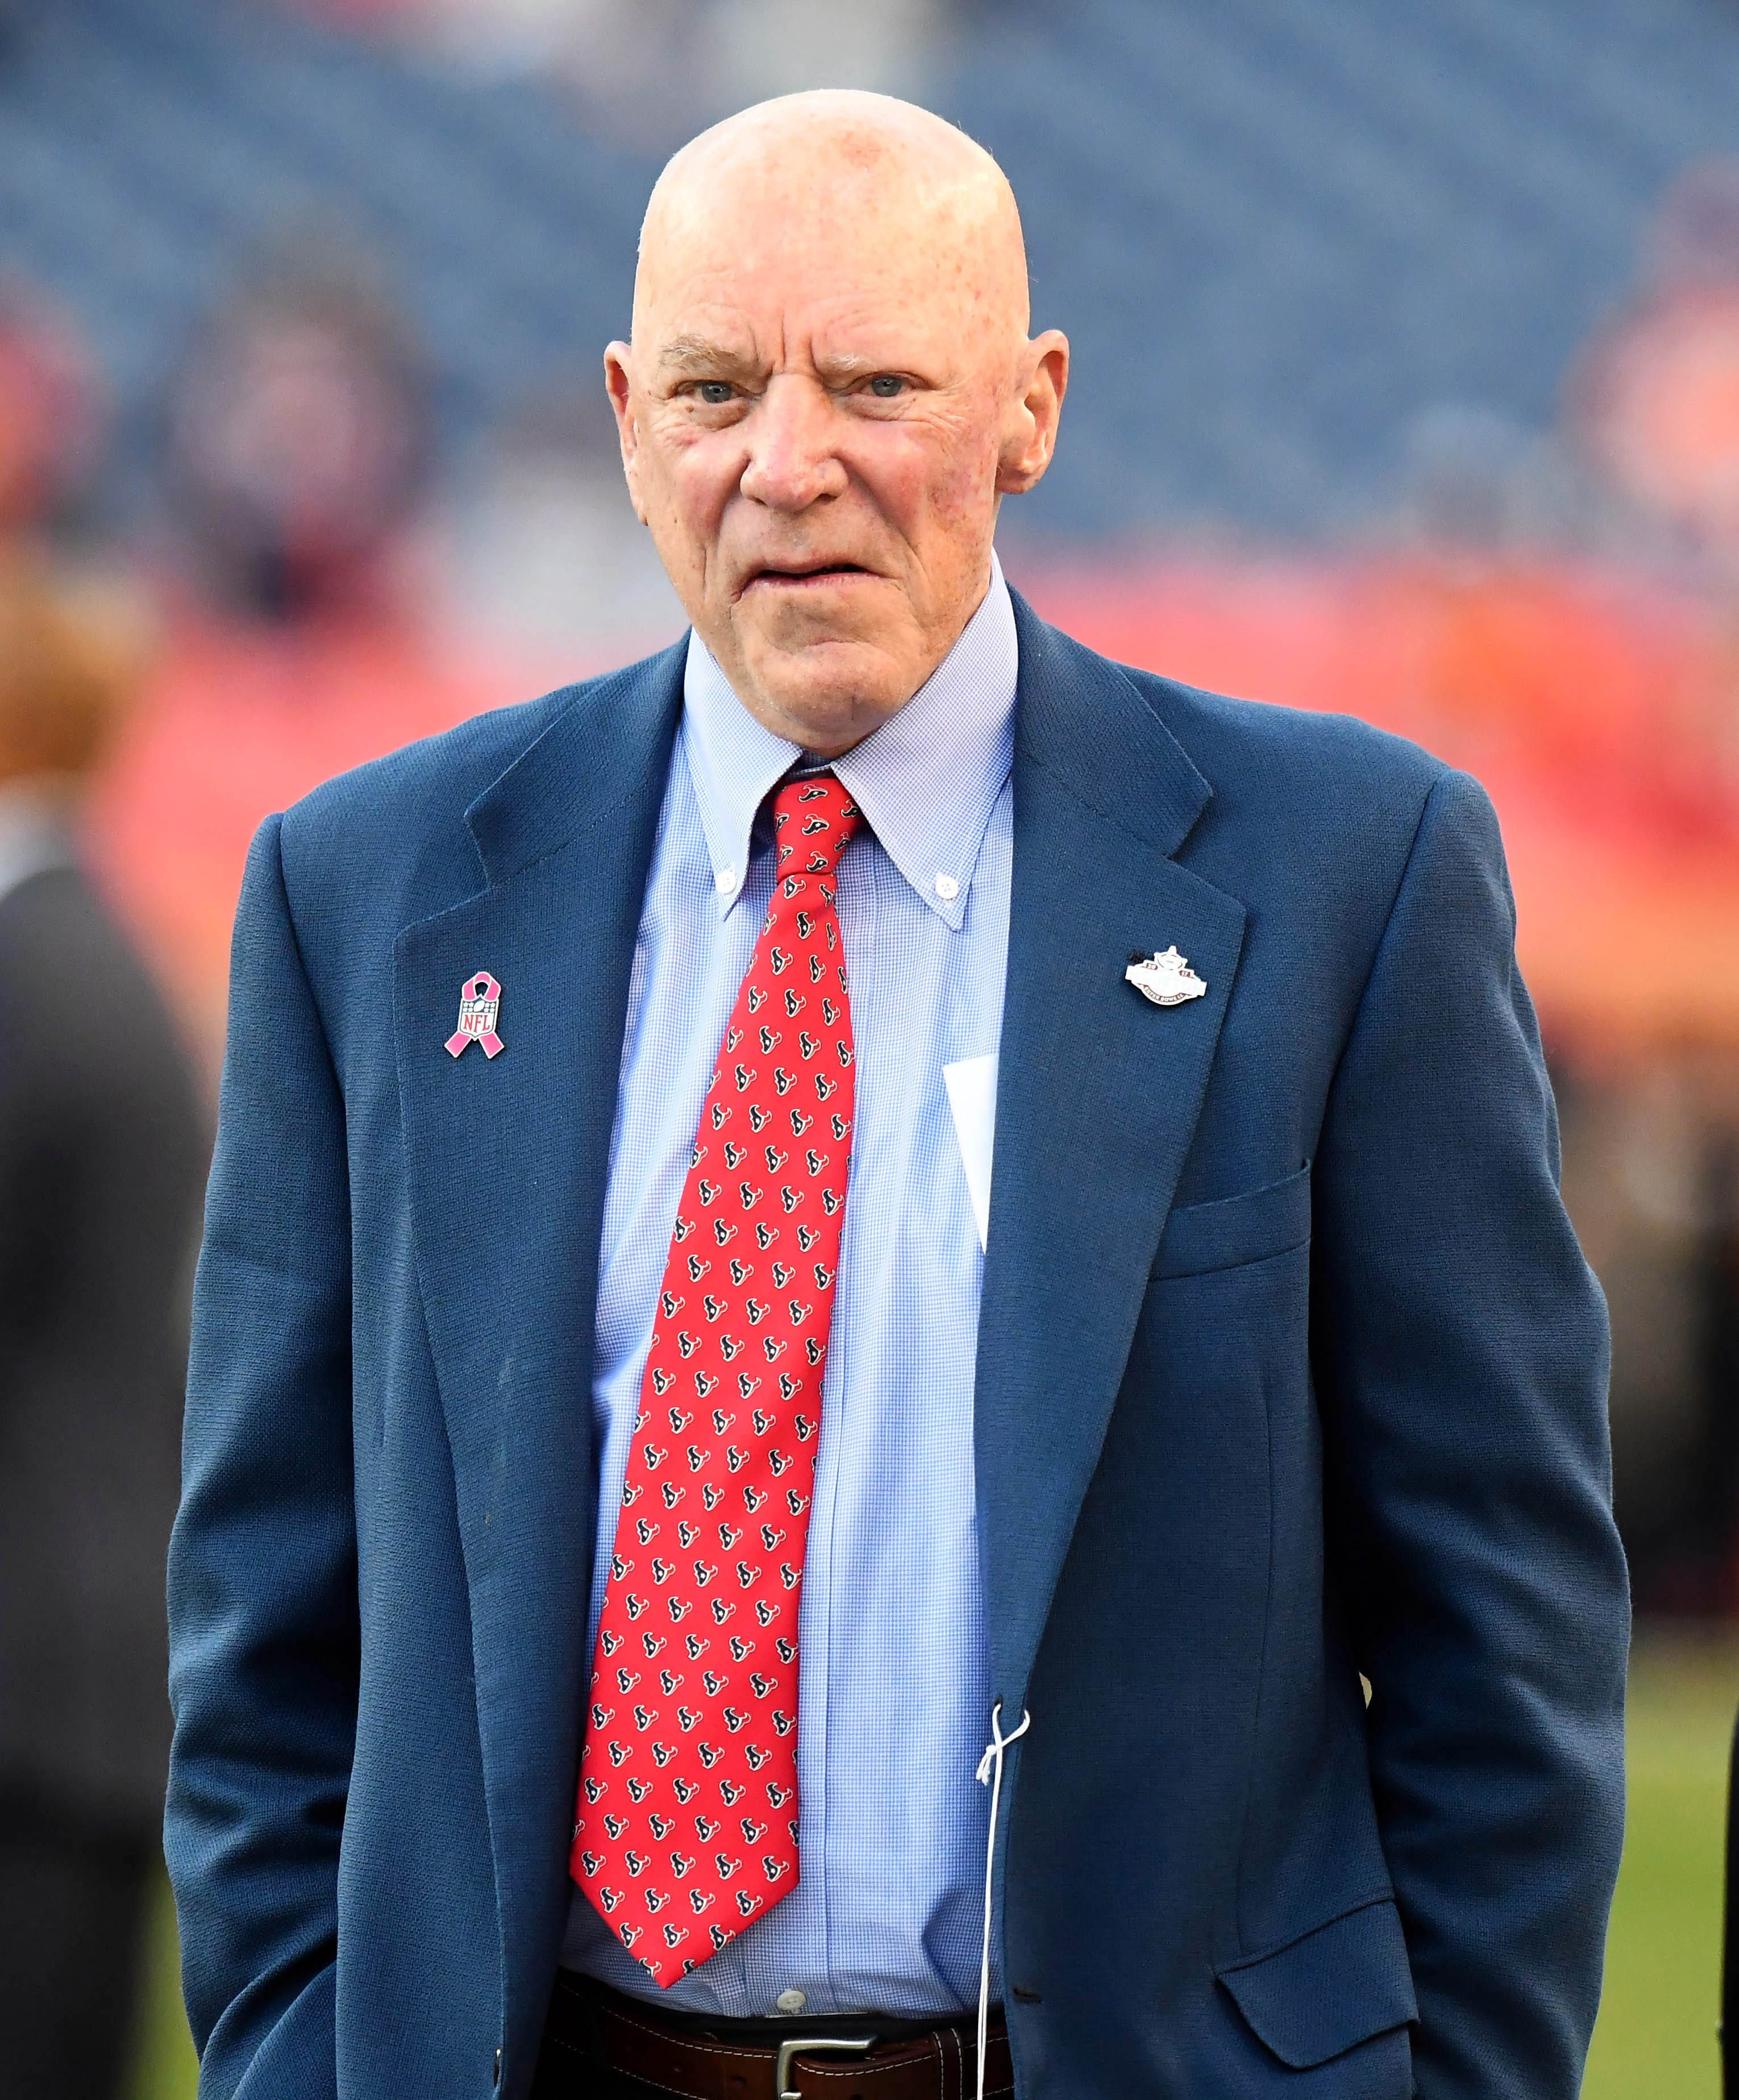 Houston Texans owner Bob McNair met with players to discuss, express regret over 'inmates' comment